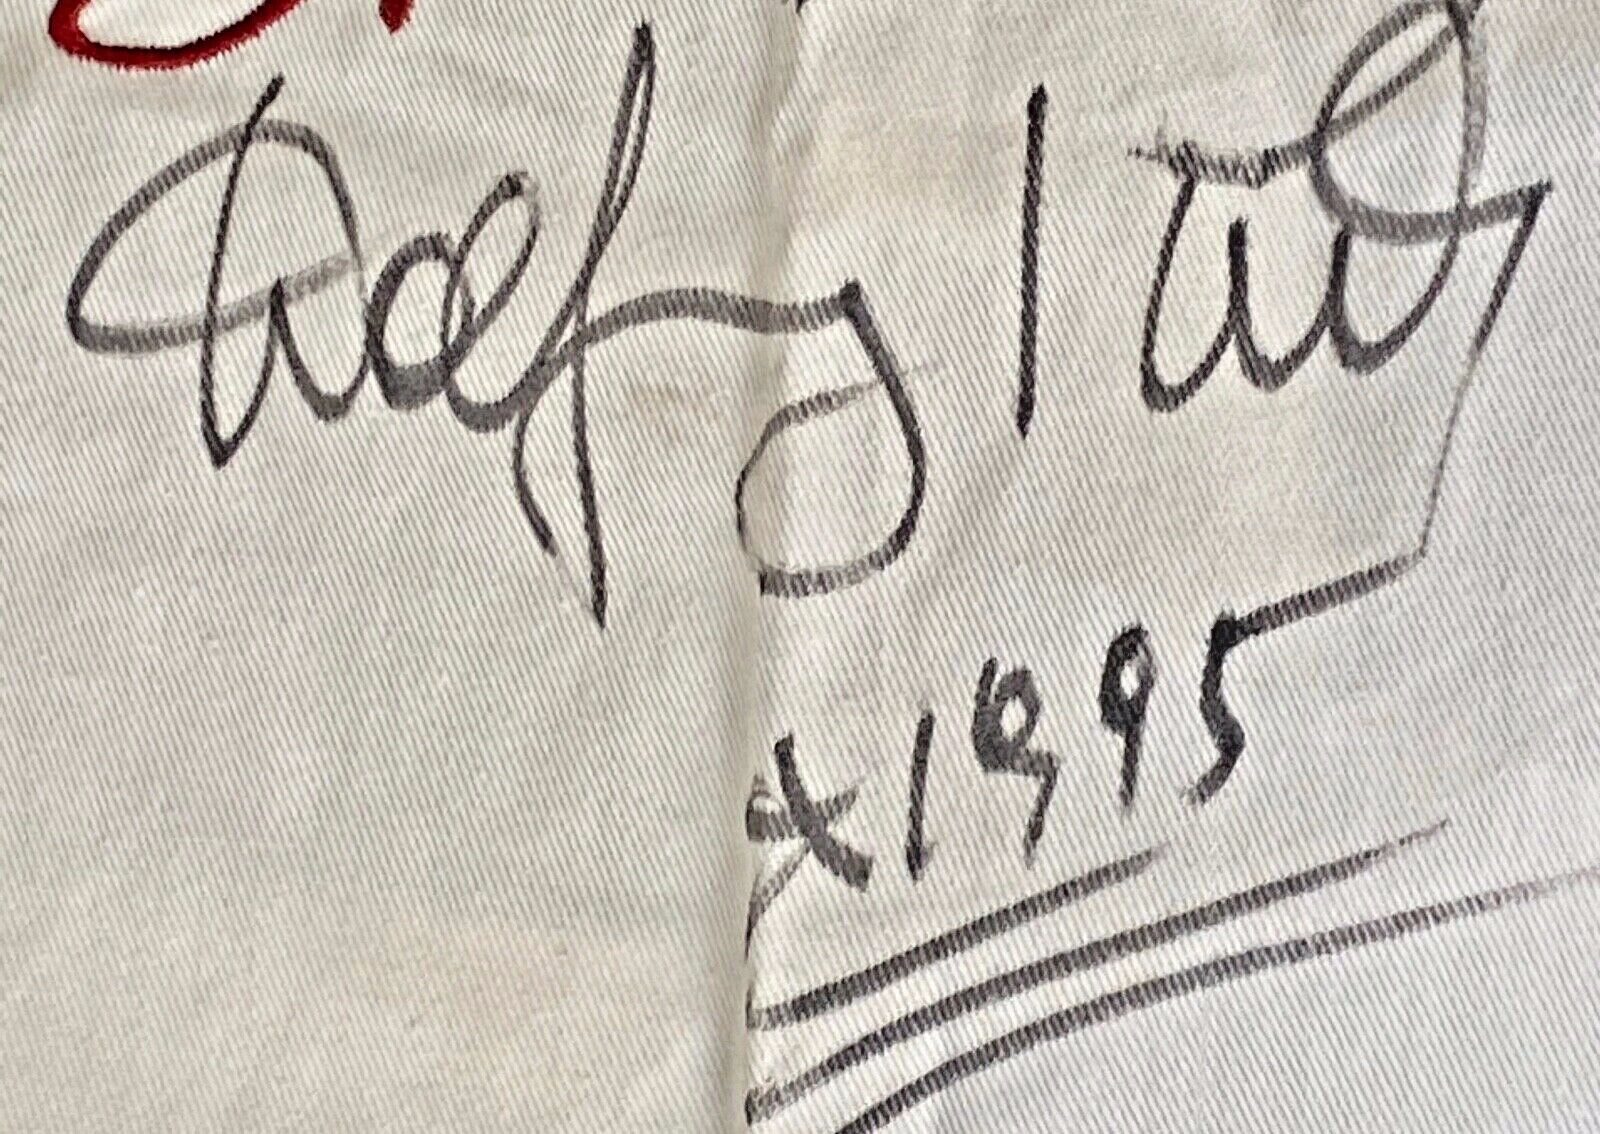 WOLFGANG PUCK SIGNED "SPAGO" APRON + "ADVENTURES IN THE KITCHEN" BOOK Без бренда - фотография #3